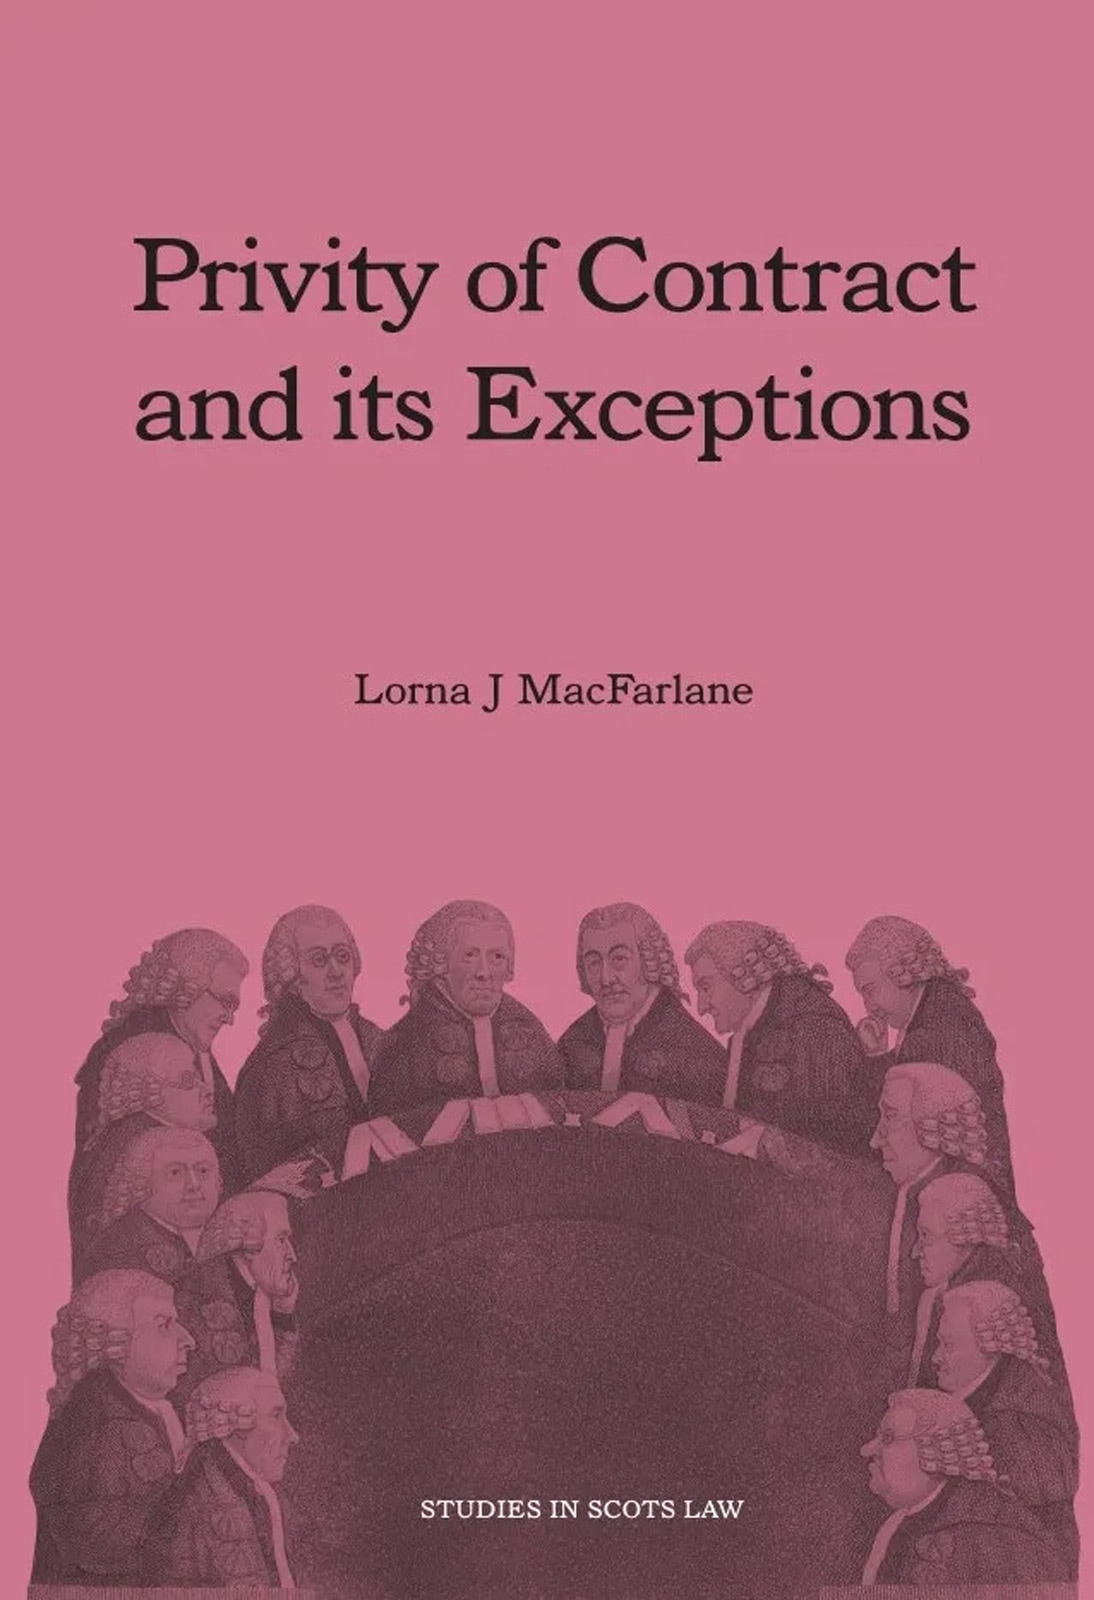 Cover, Privity of Contract and its Exceptions, by Lorna J MacFarlane